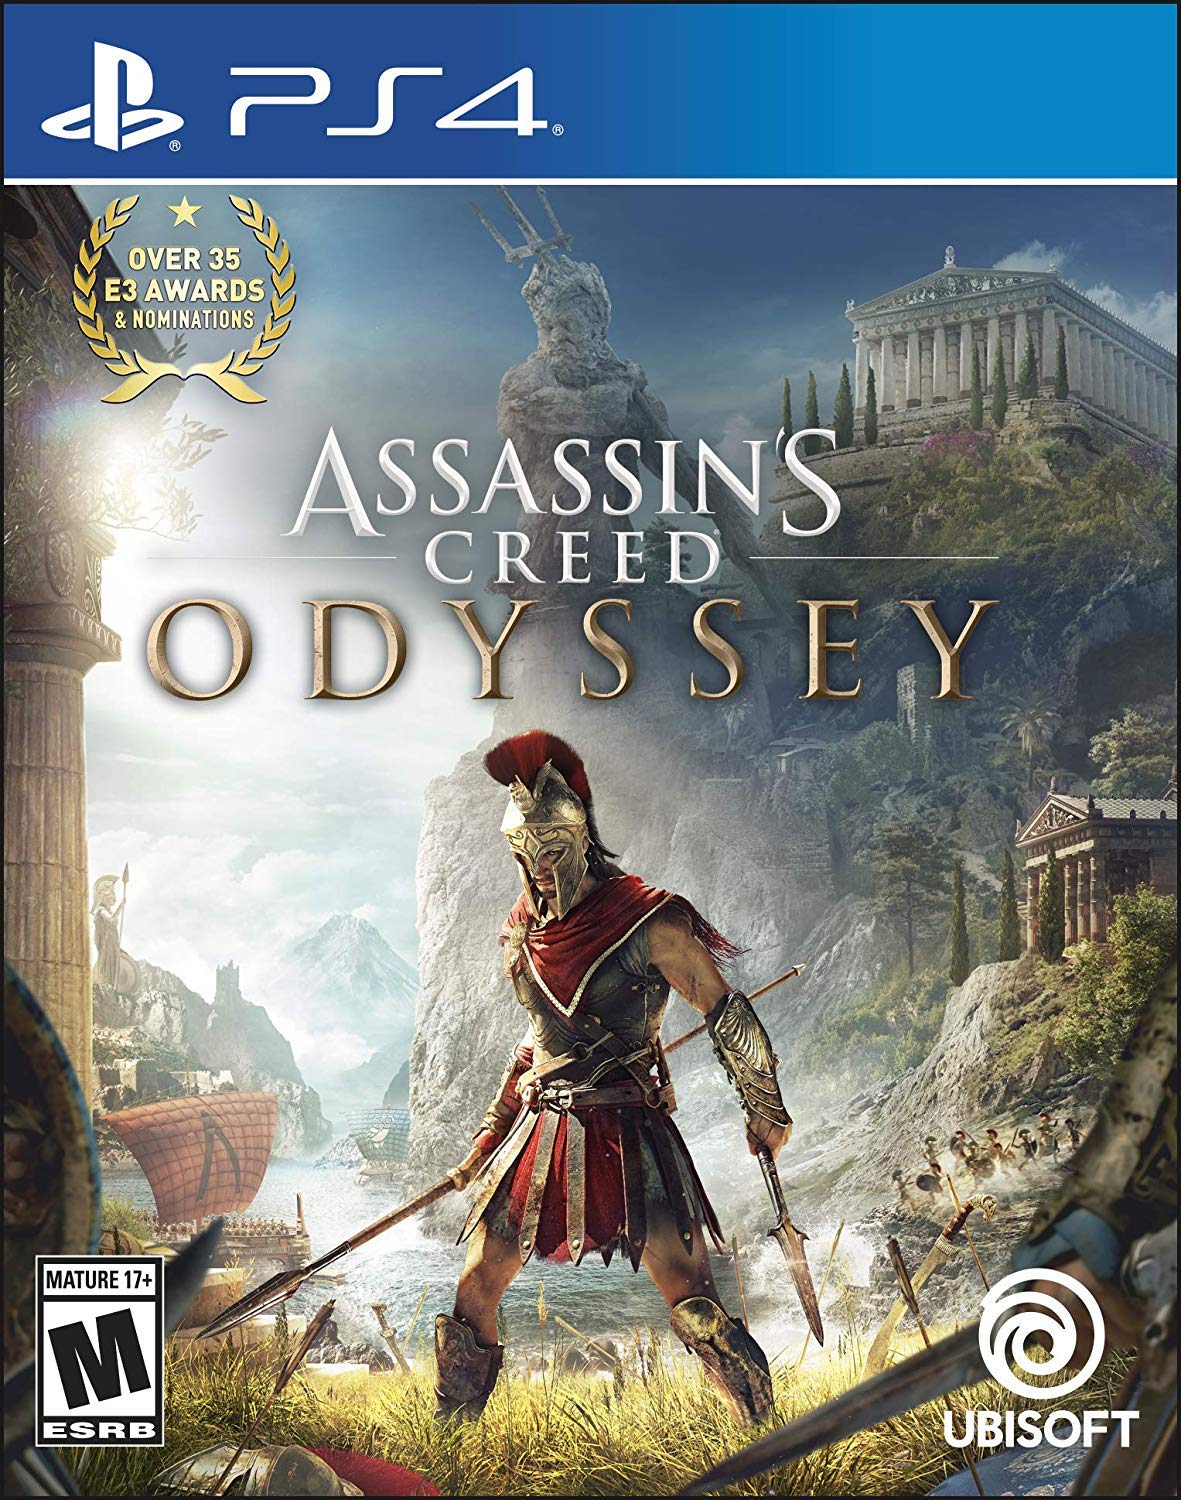 Assassin's Creed Odyssey - Playstation 4